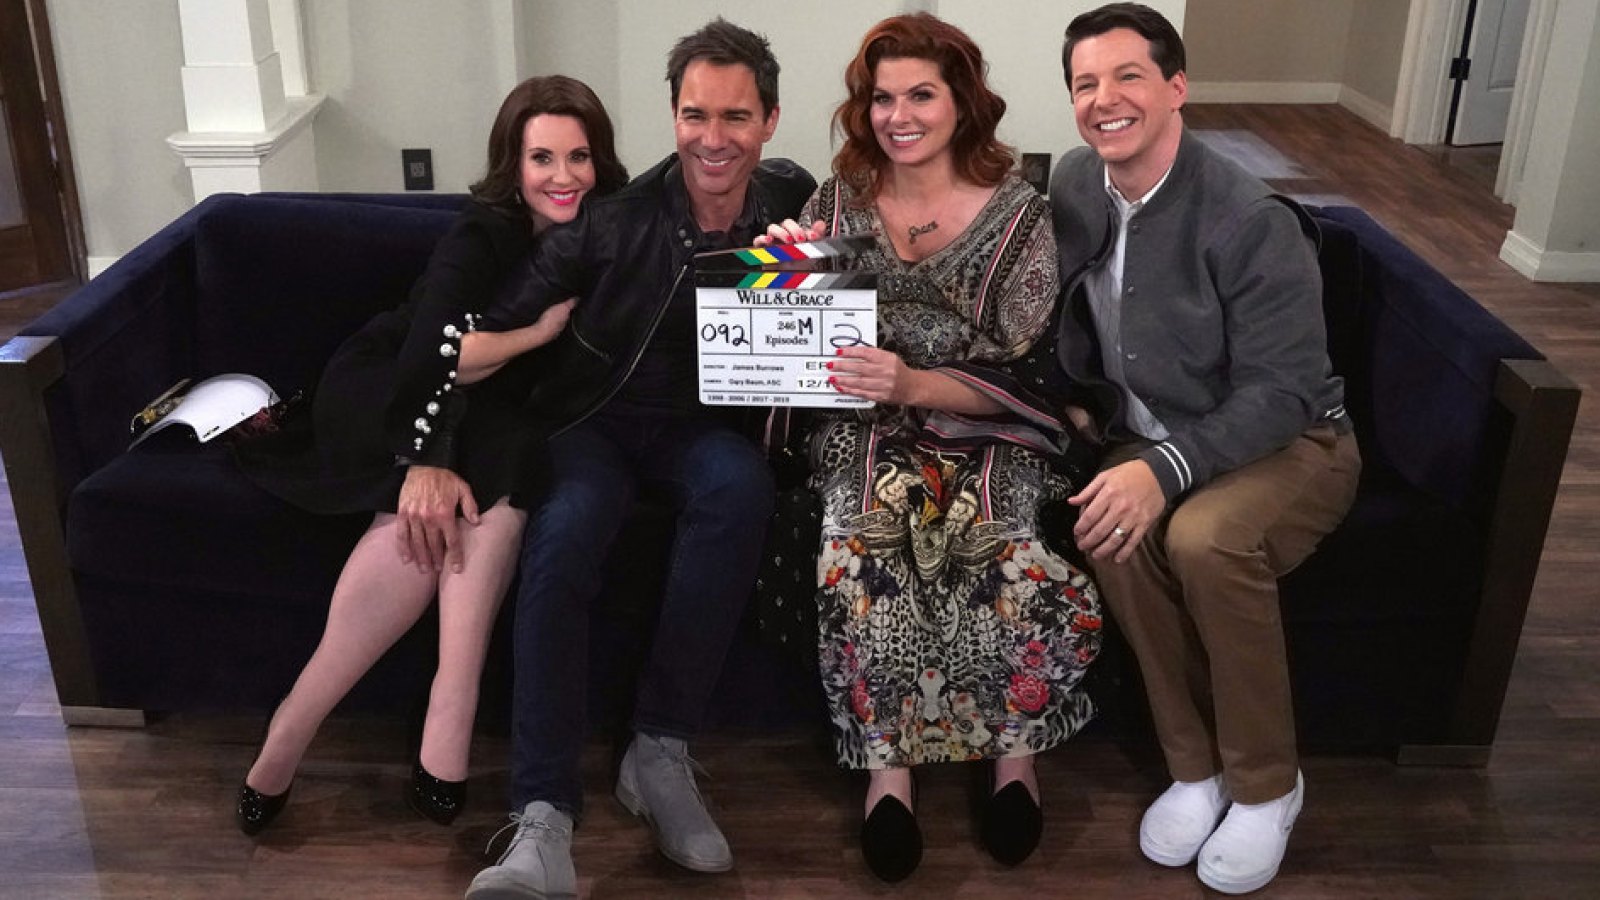 Will and Grace Finale Debra Messing Sean Hayes Megan Mullally Eric McCormack